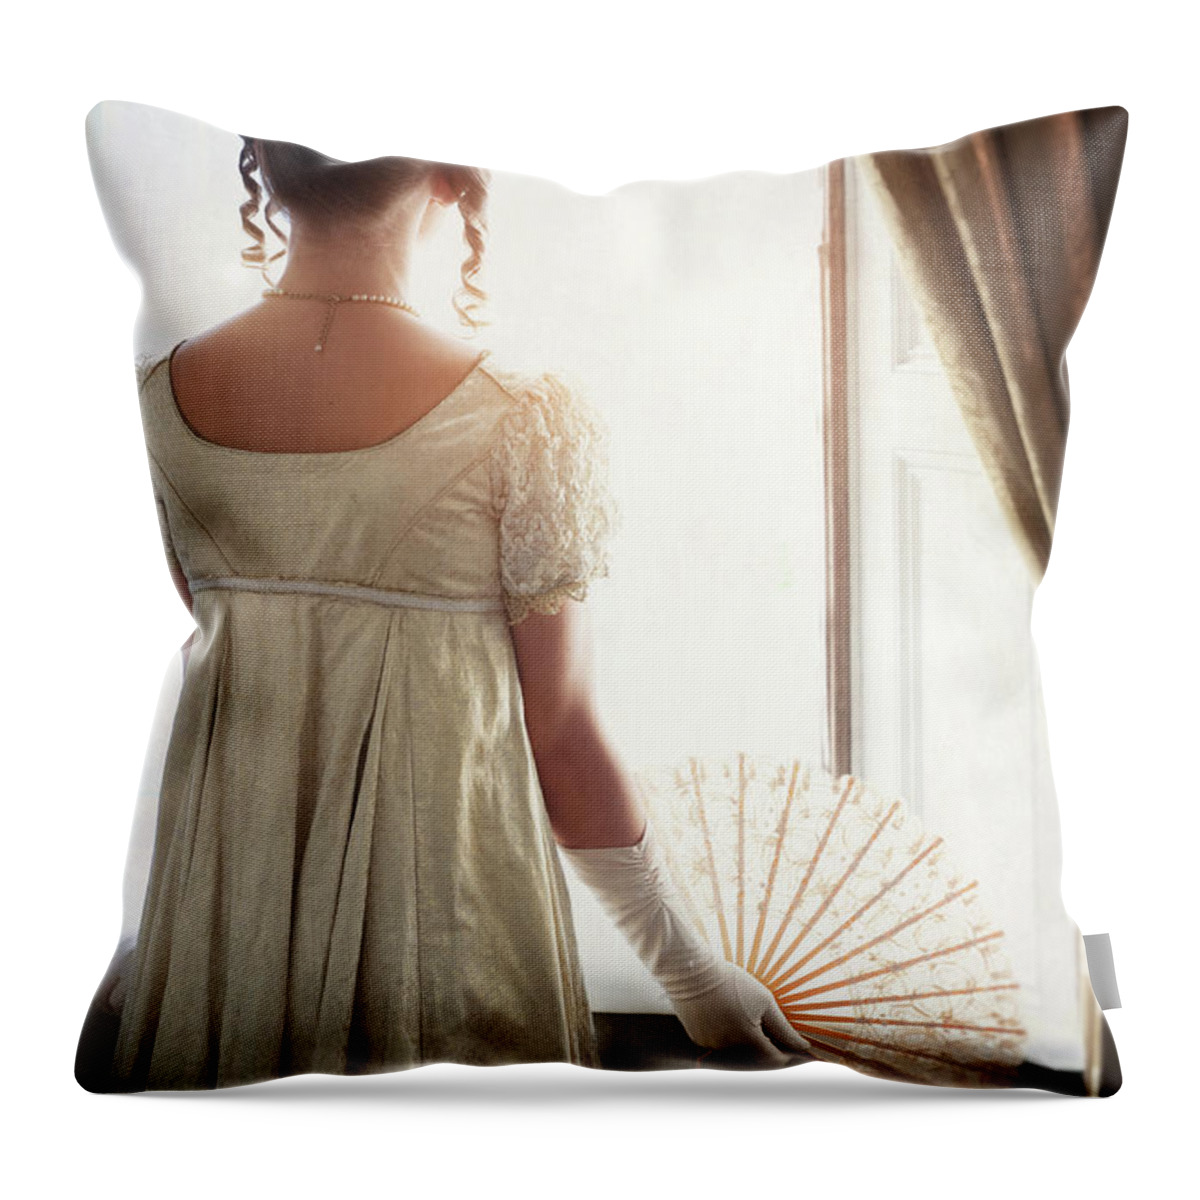 Regency Throw Pillow featuring the photograph Regency Woman Looking Out Of The Window by Lee Avison